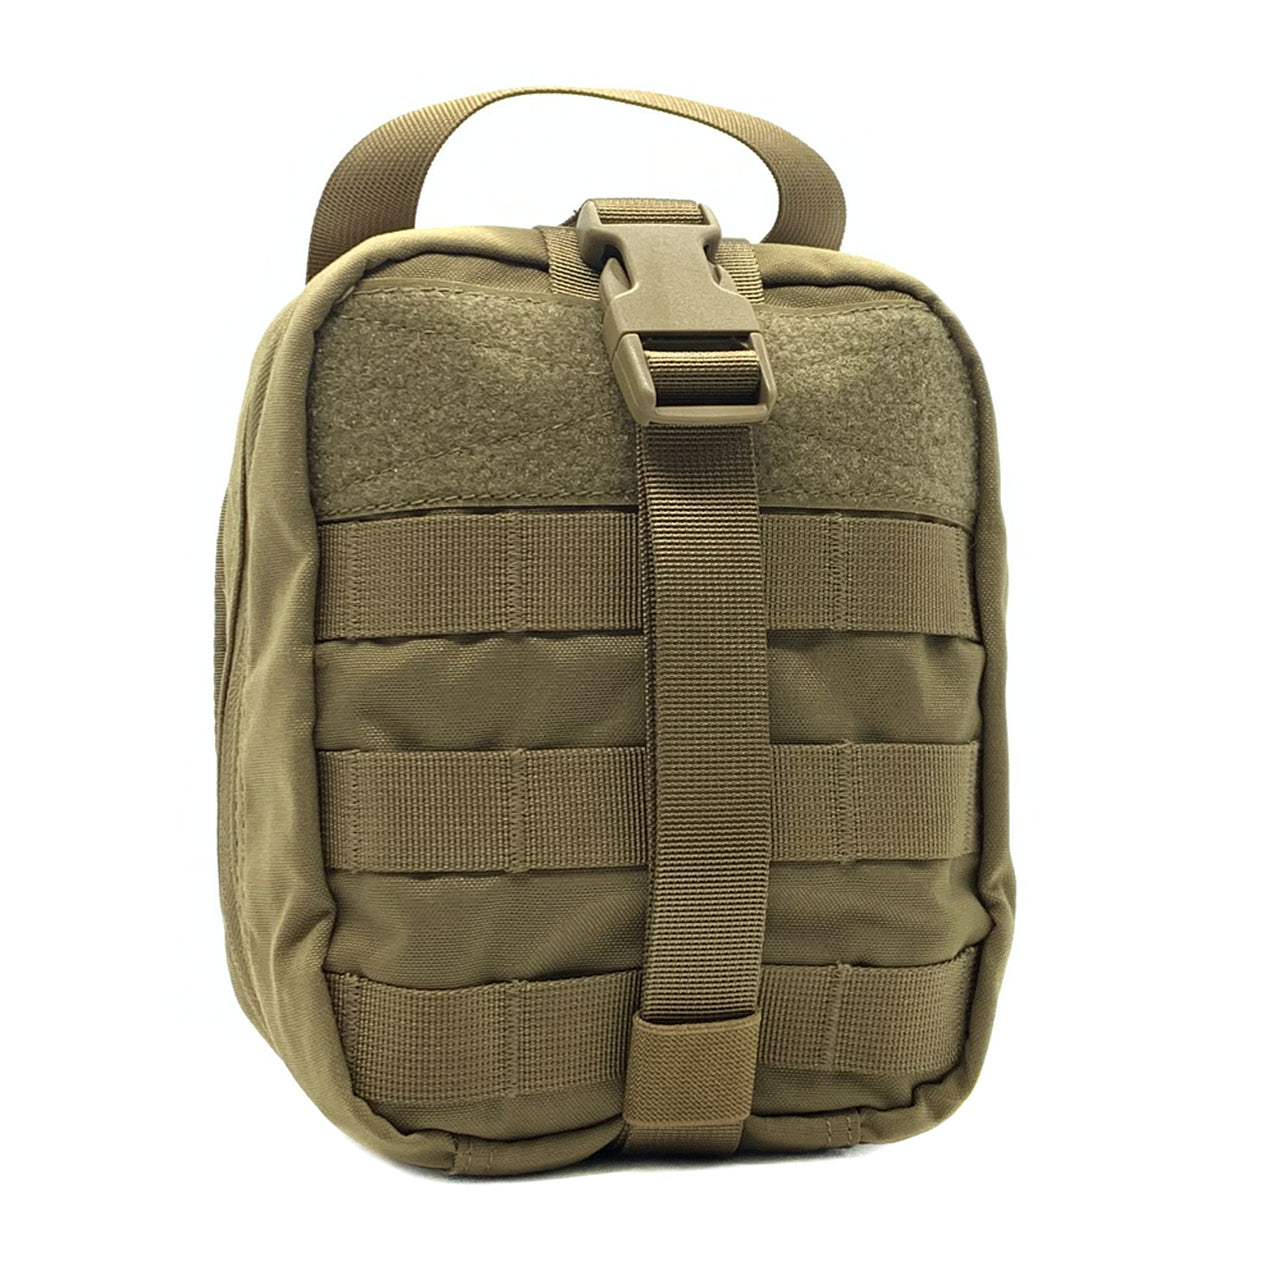 Shellback Tactical Rip Away Individual First Aid (IFAK) Medic Pouch featuring MOLLE systems and tourniquets, offered by Shellback Tactical